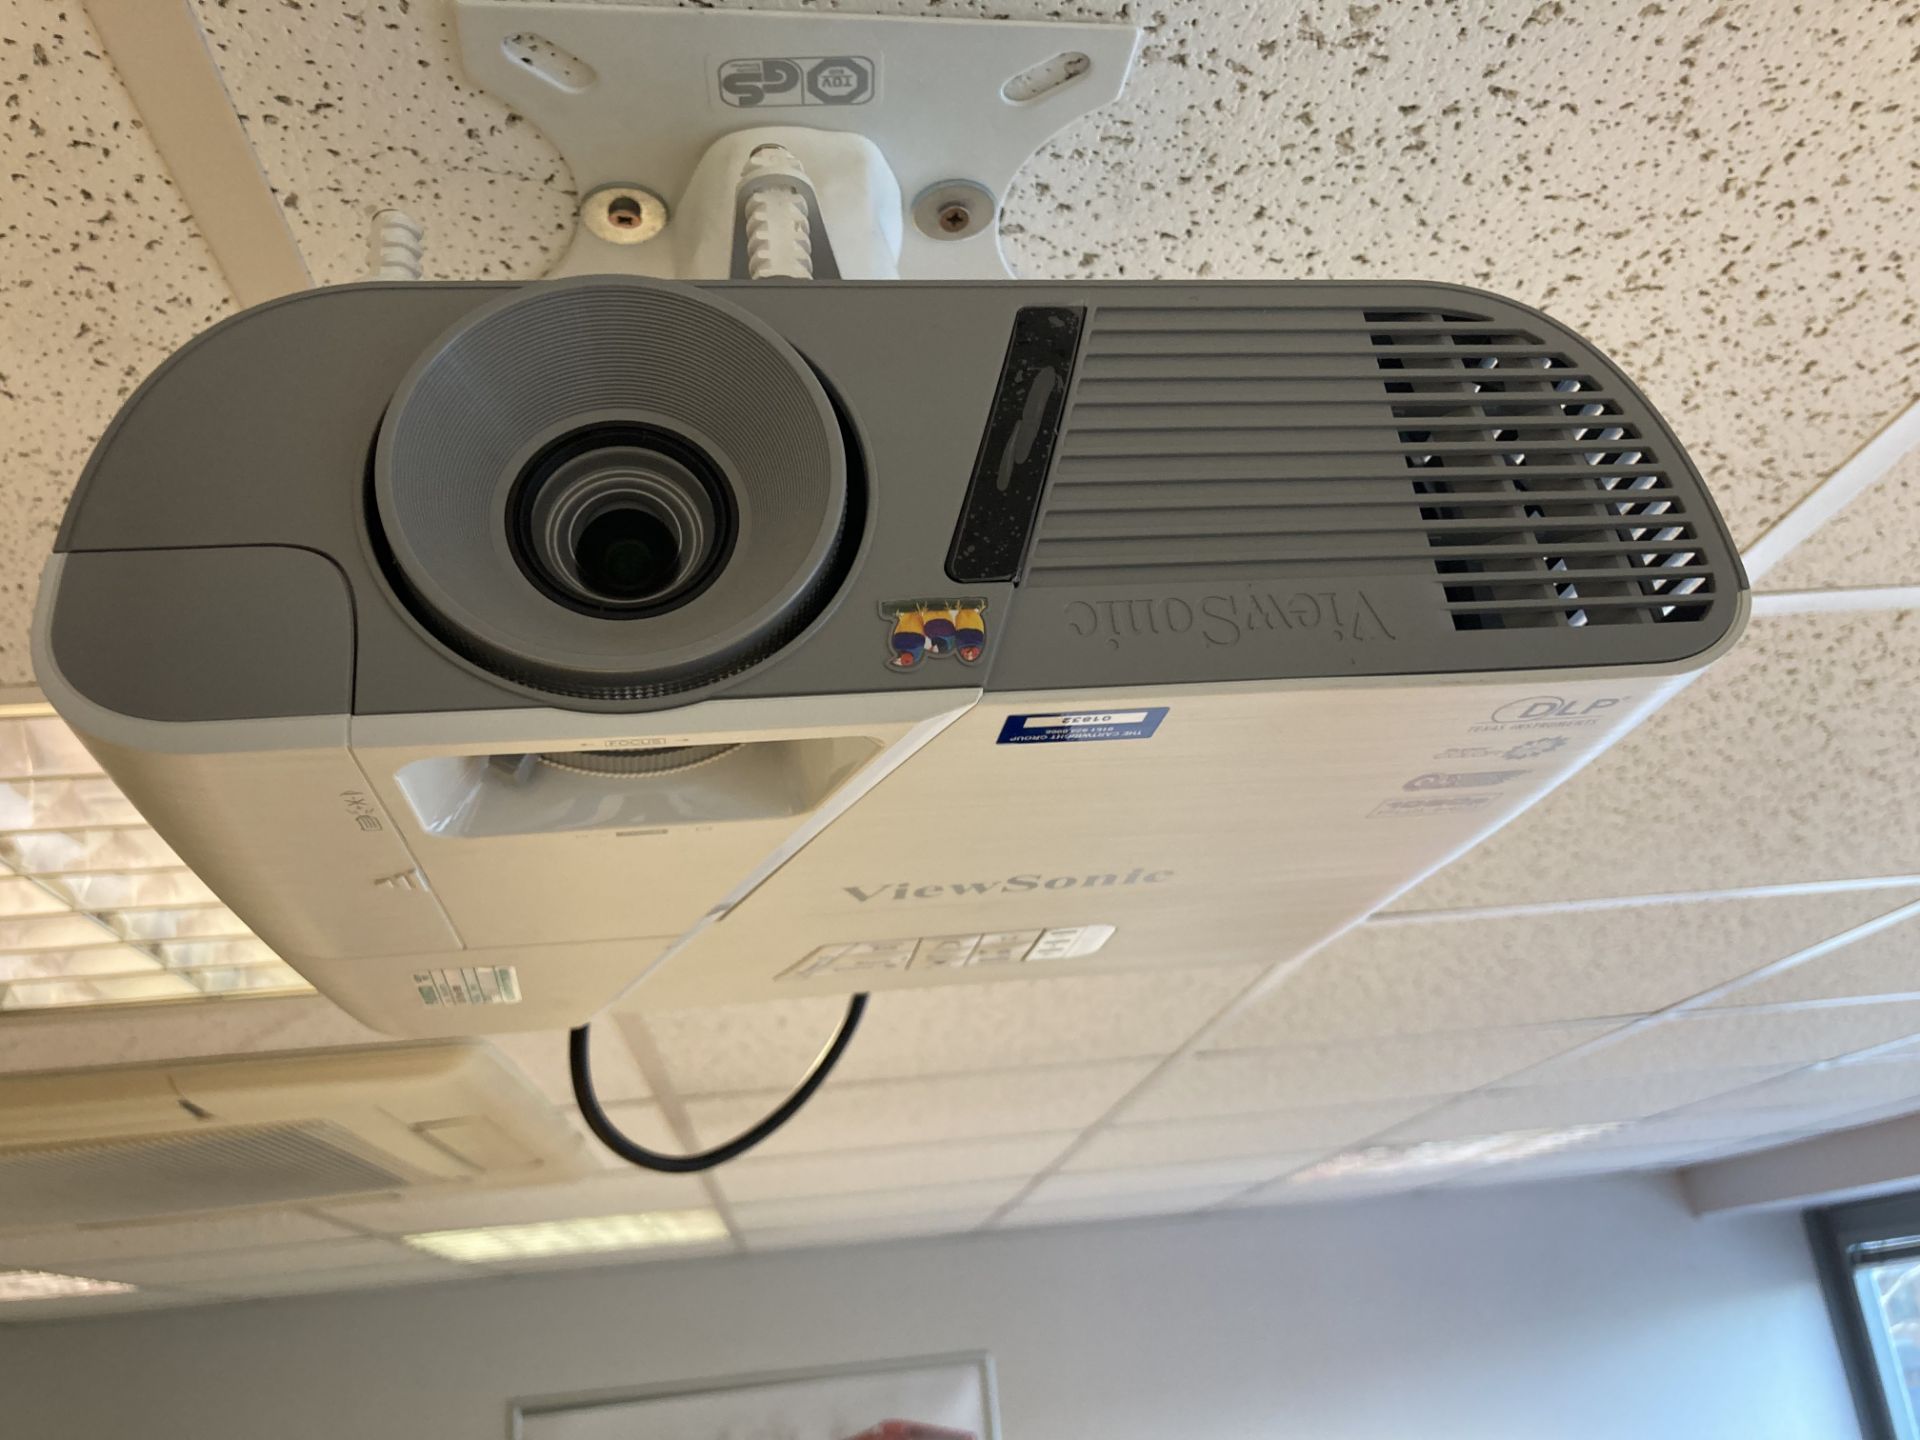 Viewsonic PJD7828HDLDLP 1080P Projector - Image 2 of 3